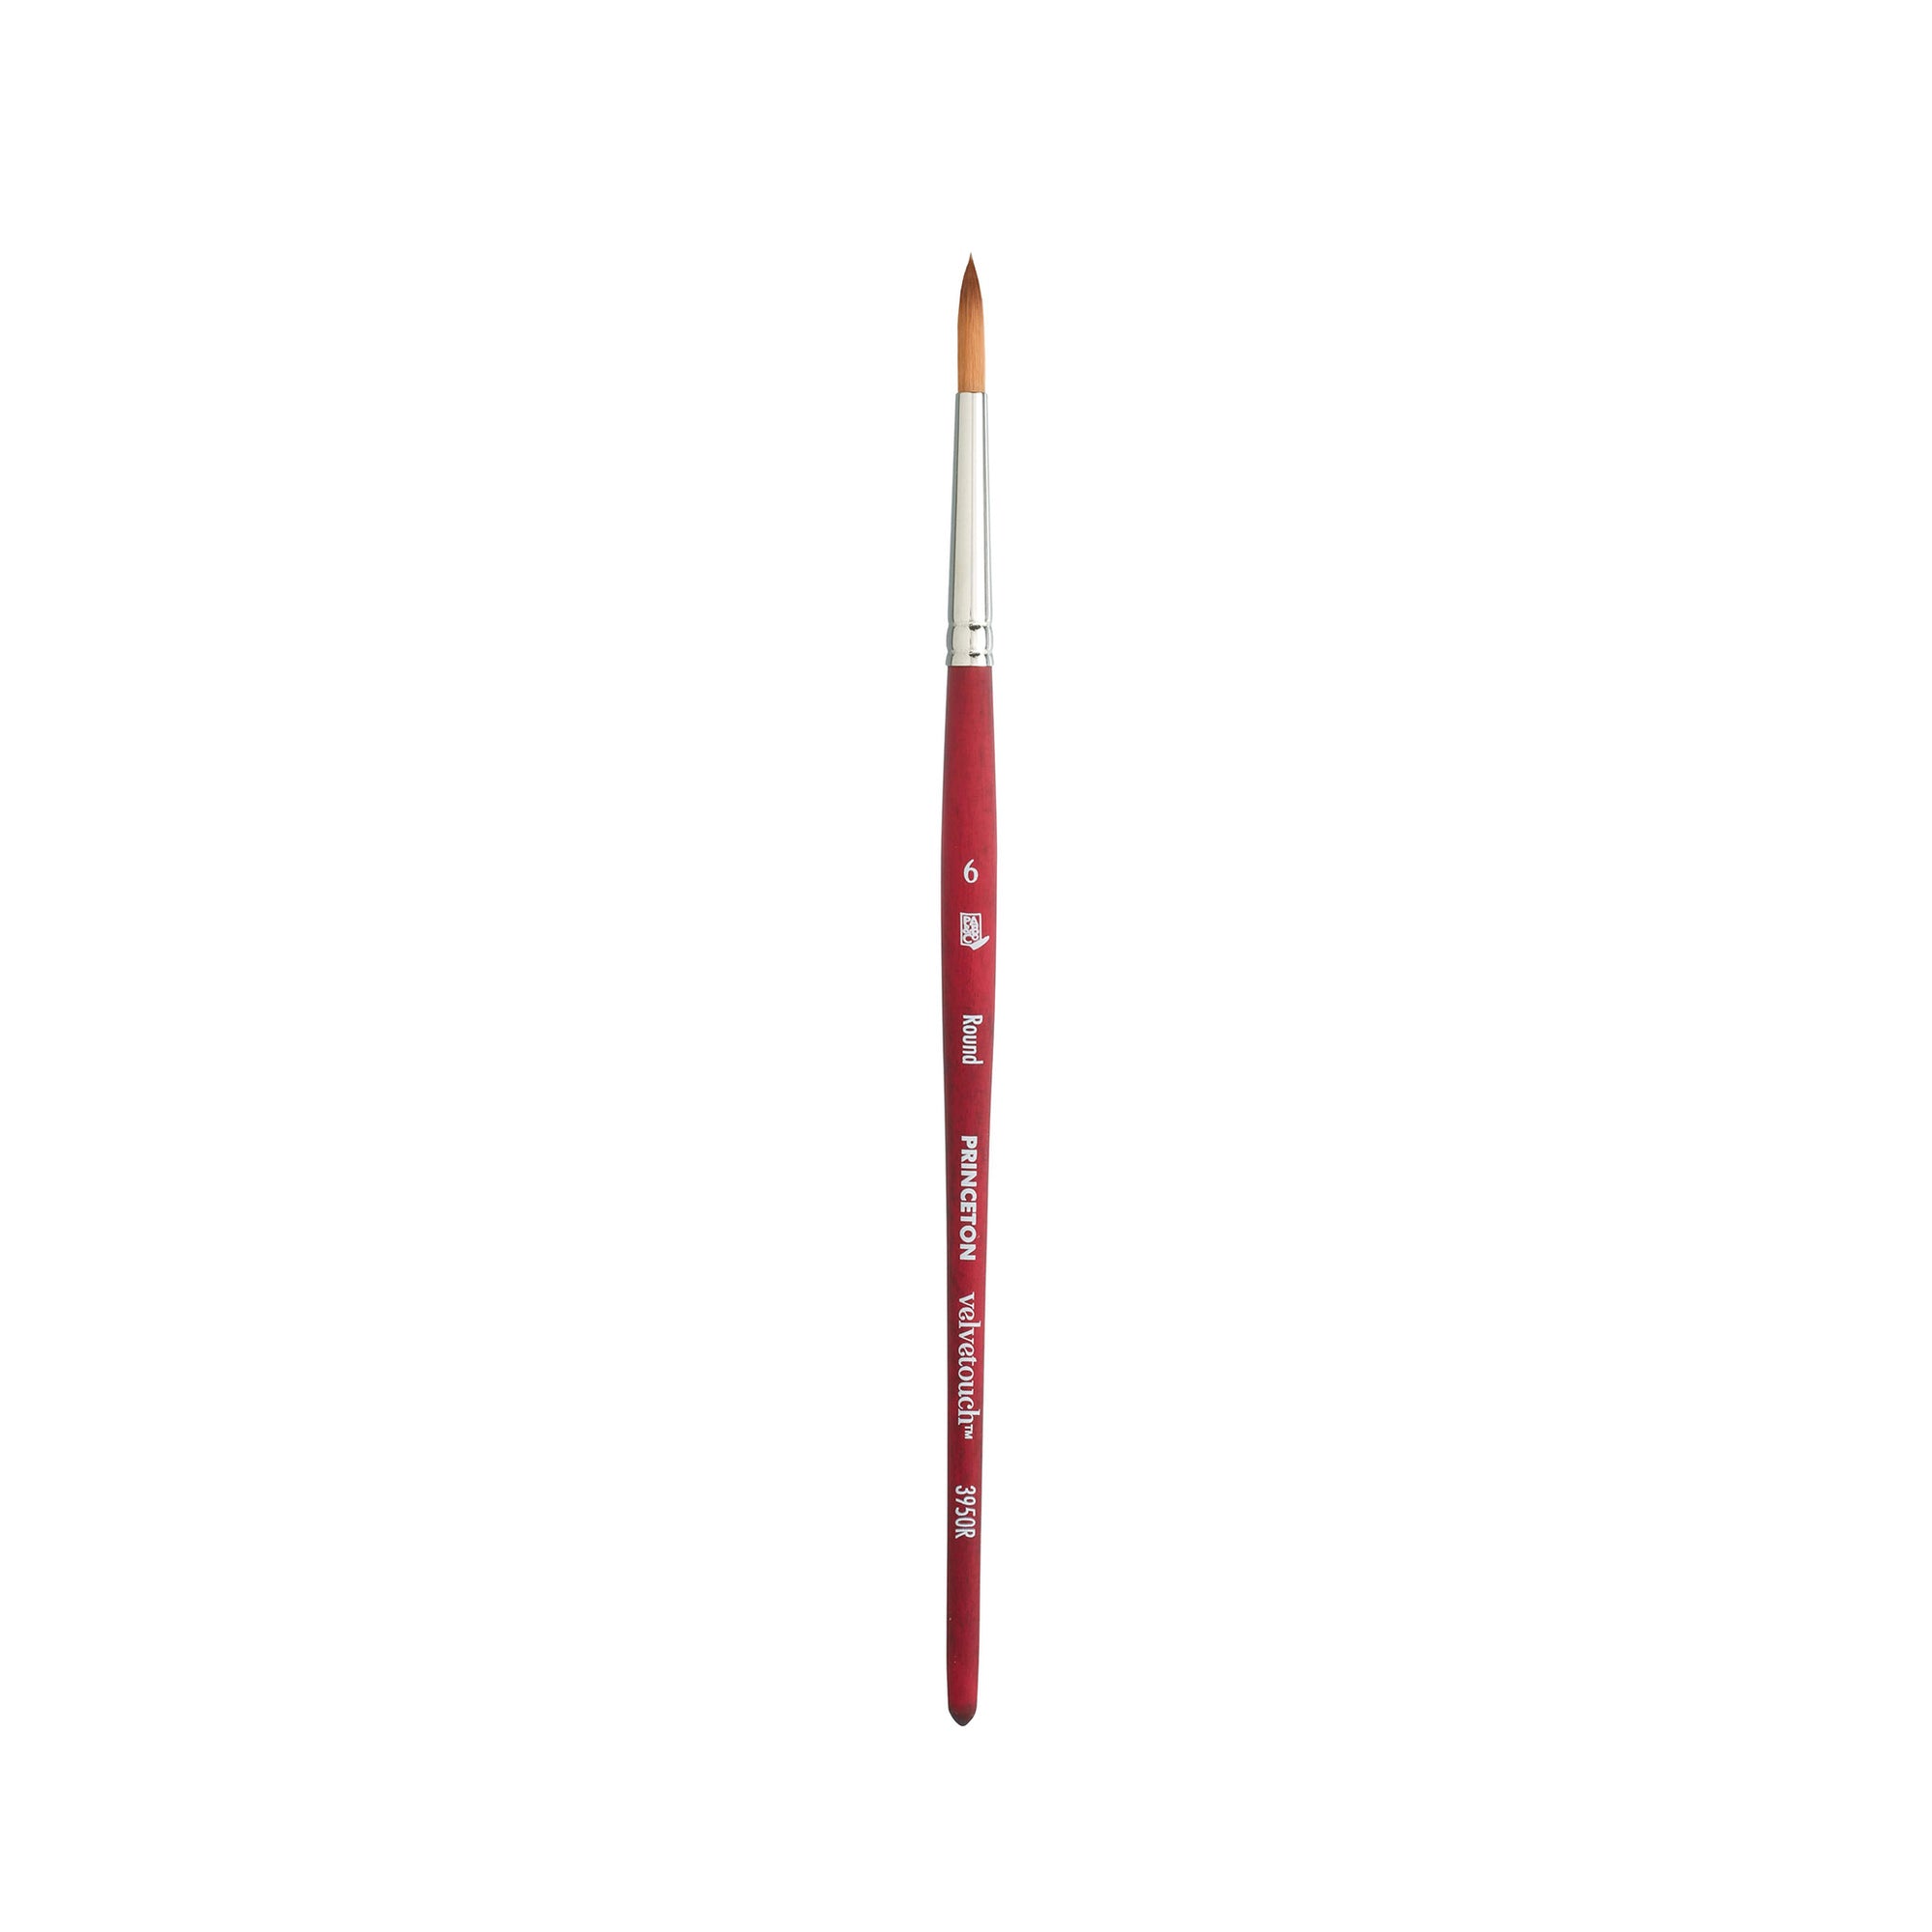  Princeton Velvetouch, Series 3950, Paint Brush for Acrylic, Oil  and Watercolor, Stroke, 1/4 Inch